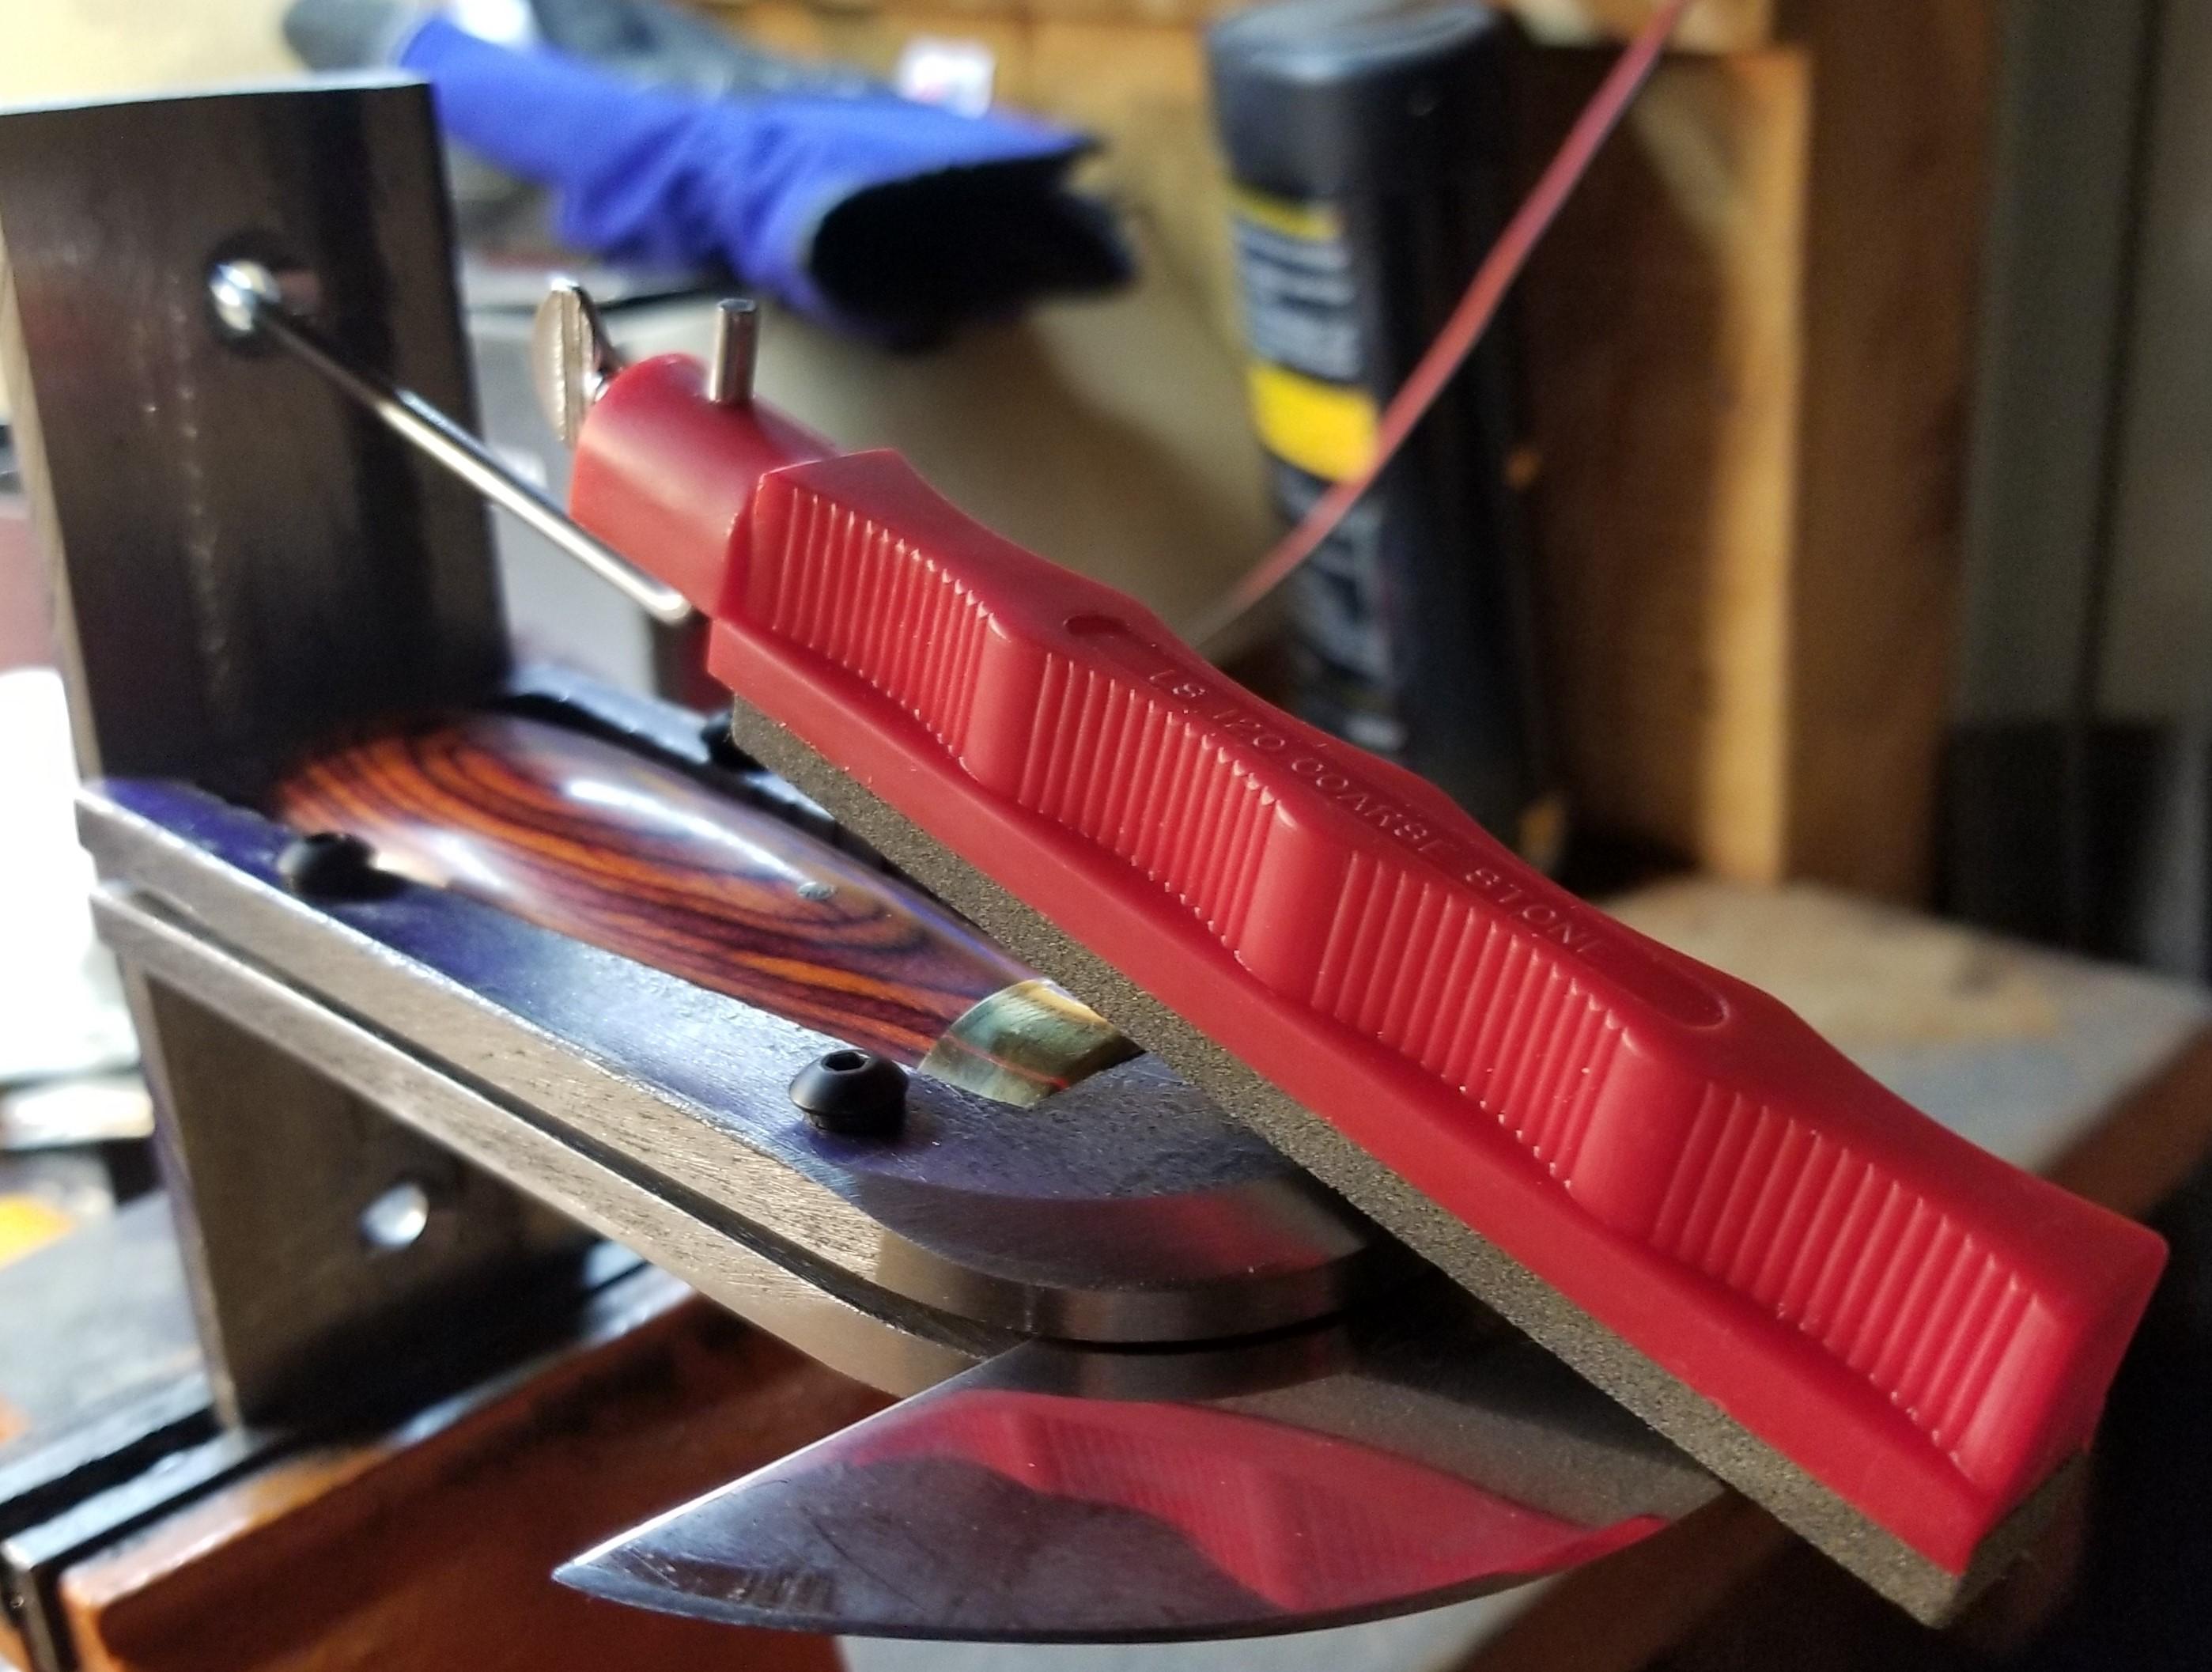 3D Printed Knife Sharpening Tool Makes The Job Easy